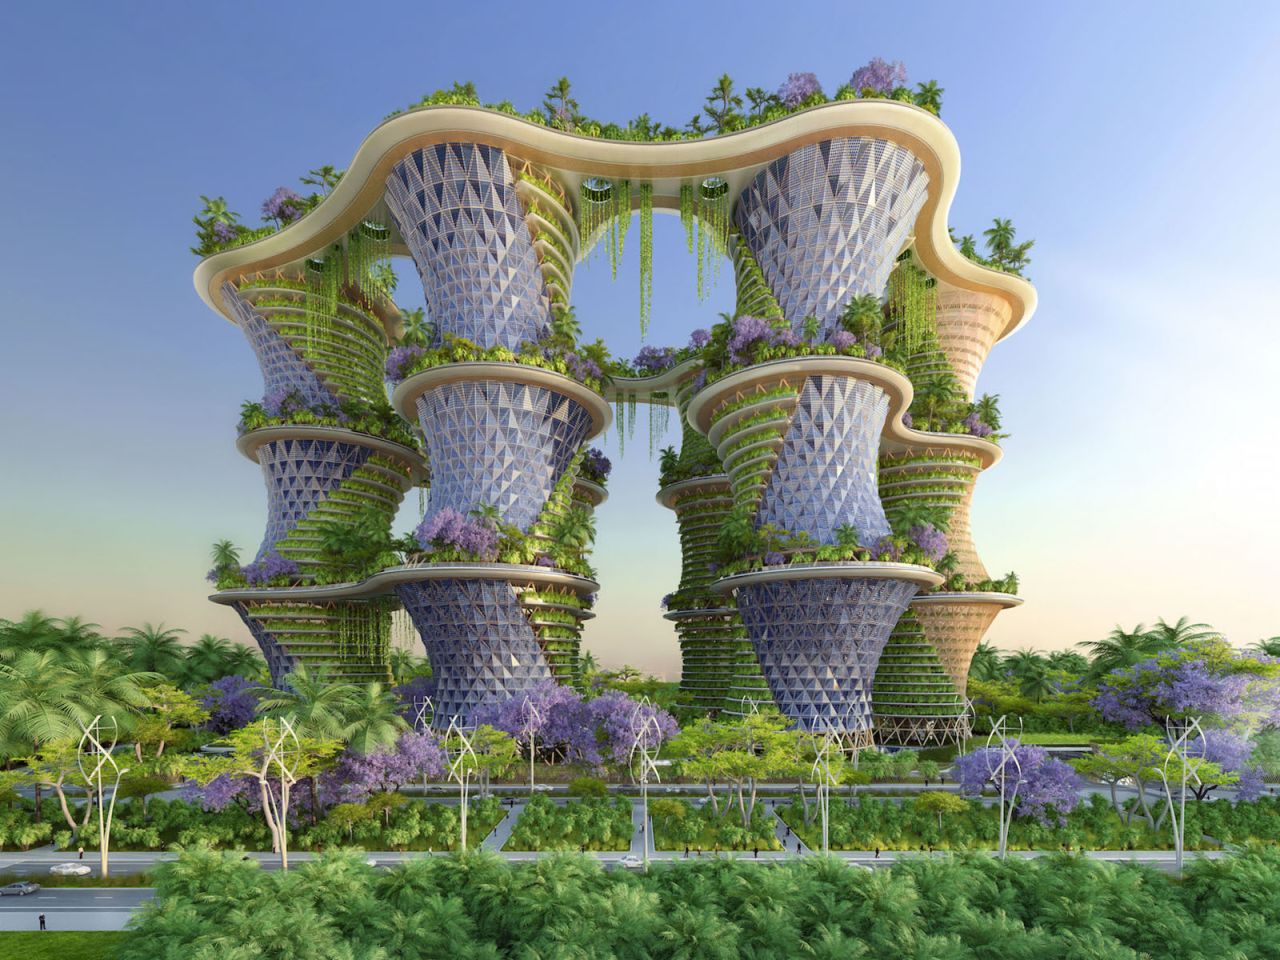 Architect Vincent Callebaut proposed a self-sustaining urban garden towers titled 'Hyperions' for India's Jaypee Greens Sports City in New Delhi.